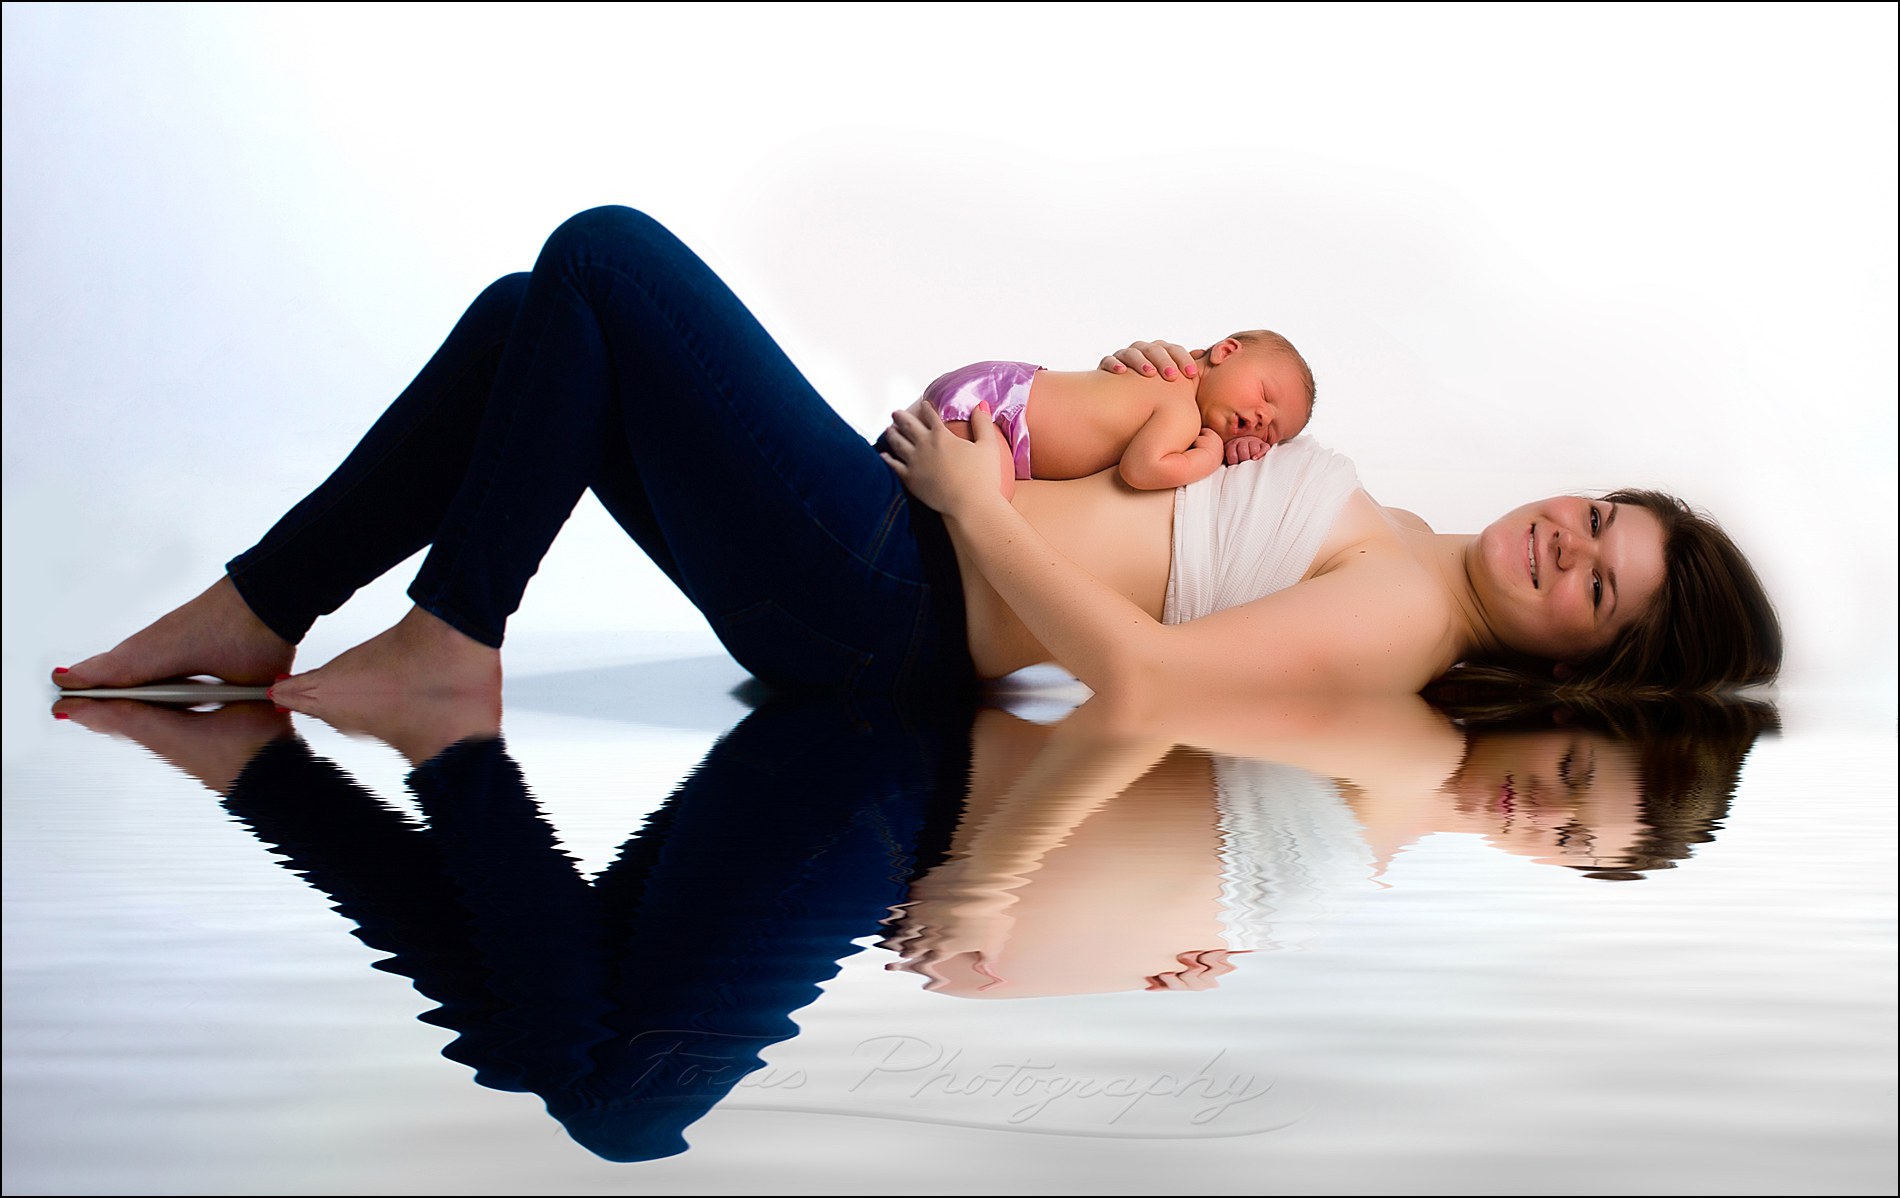 newborn photography and maternity pictures combined to crate a before/after image of pregnancy